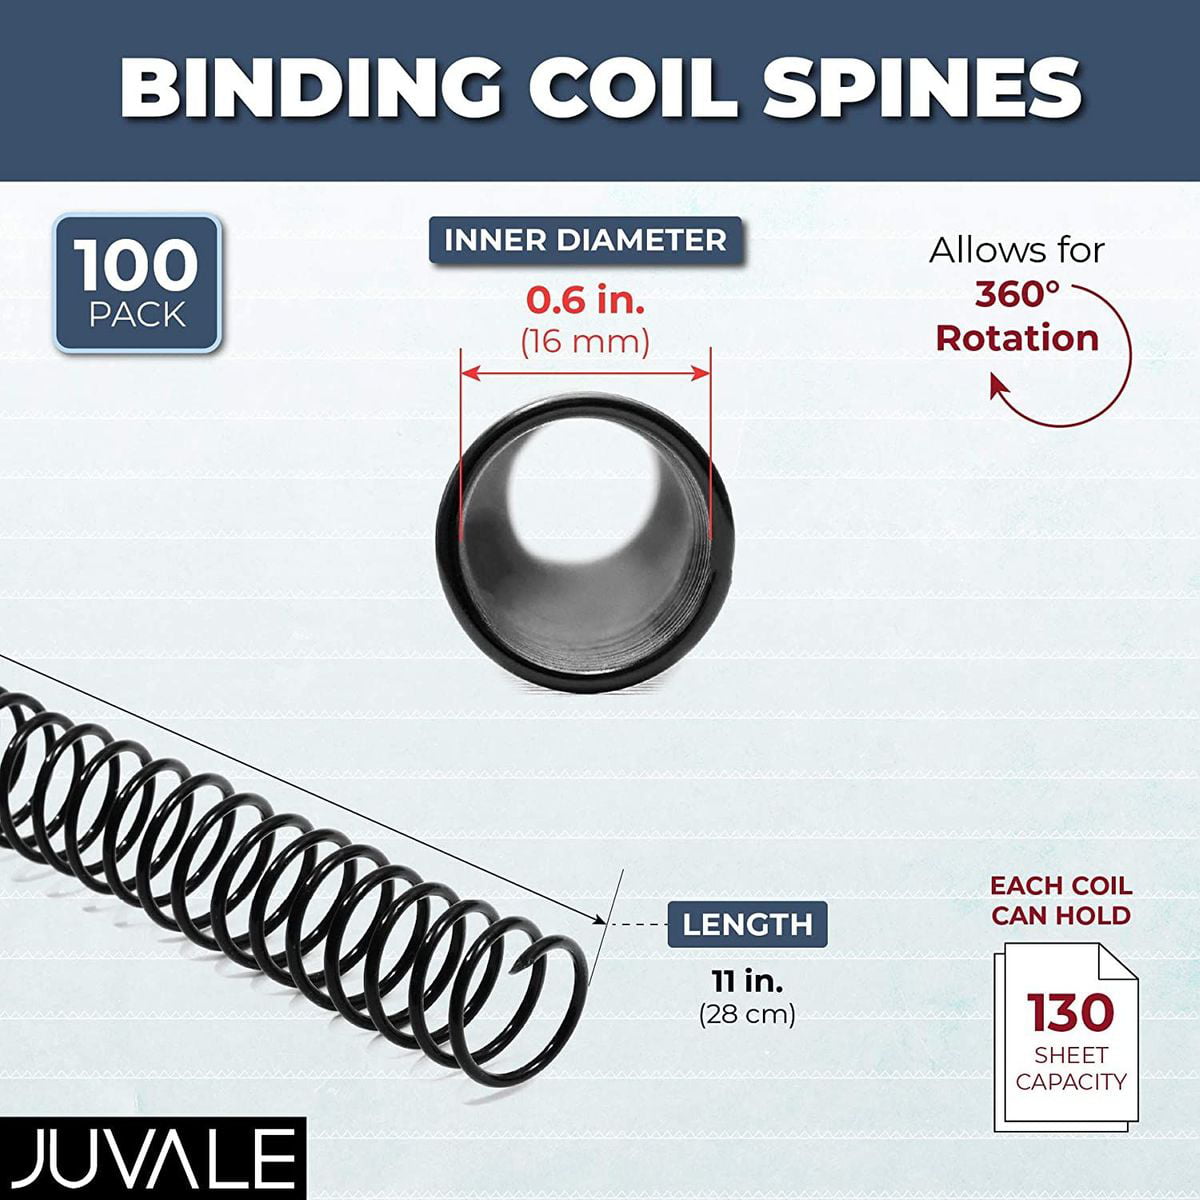 Details about   Black Spiral Binding Coils Plastic Coil Spines for 130 Sheets 16mm, 100 Pack 